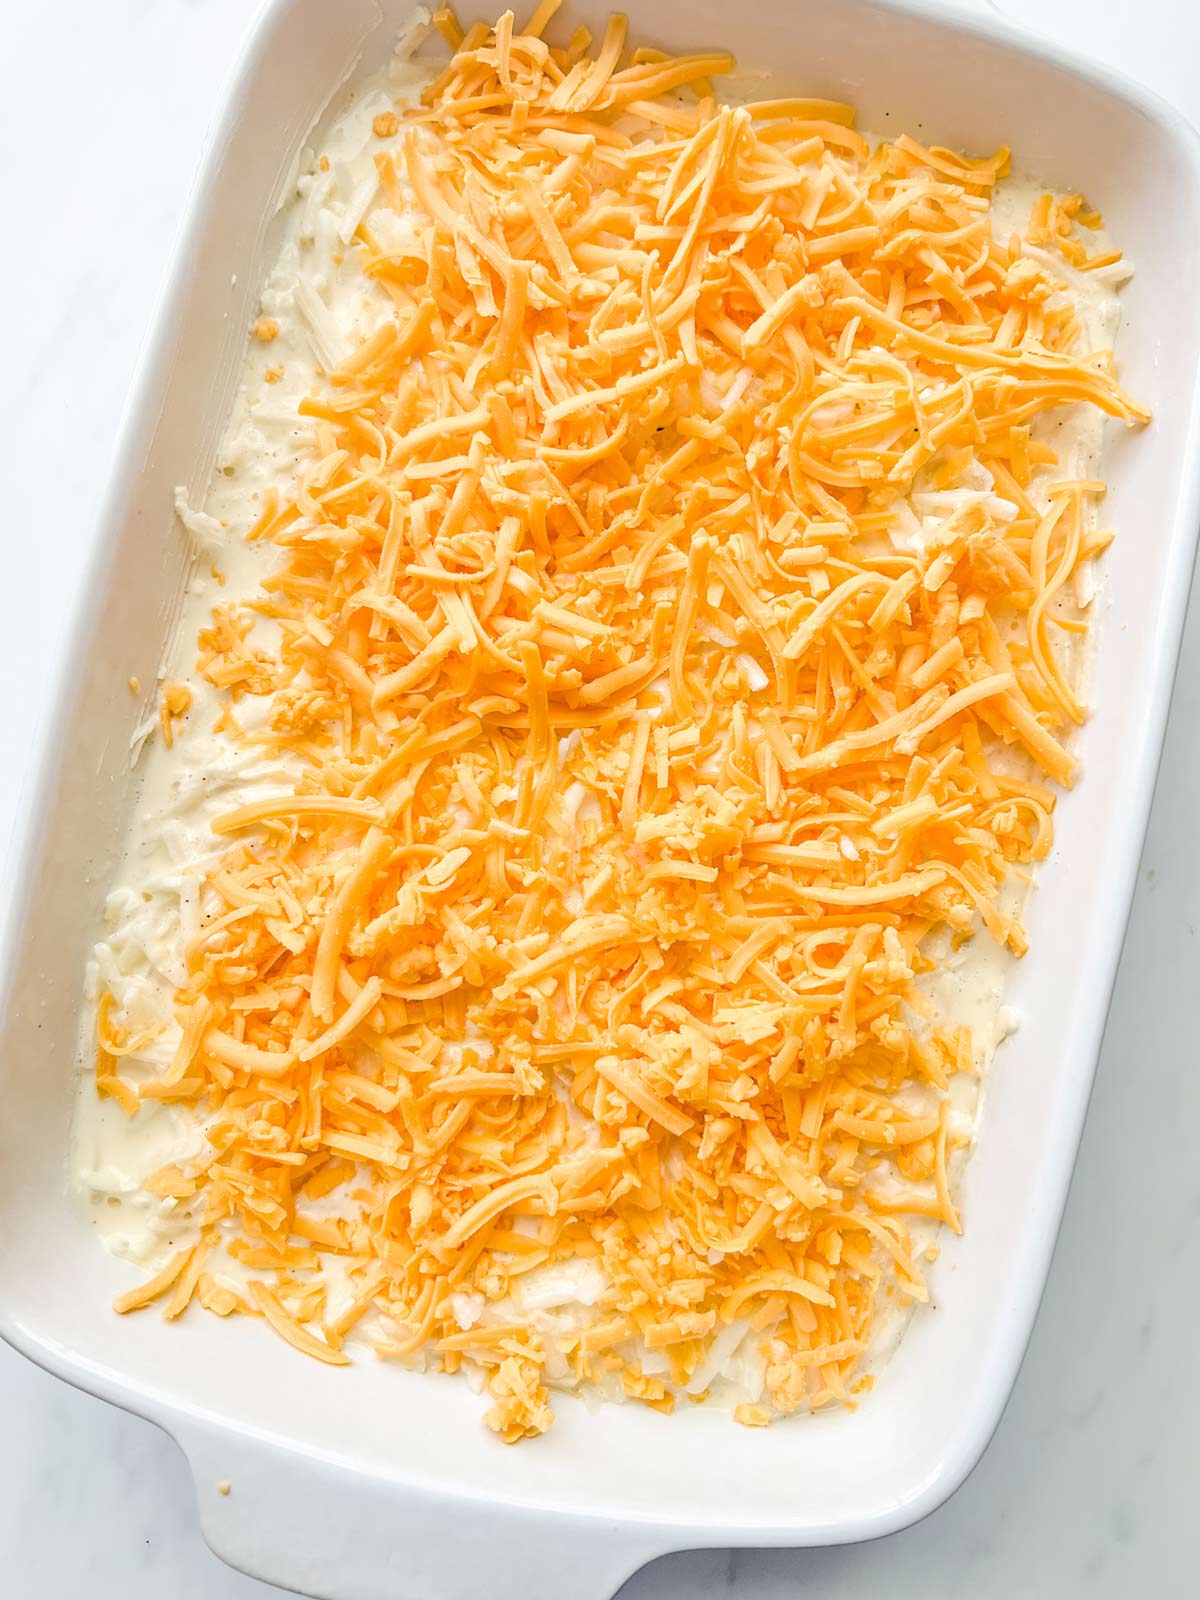 Cheddar cheese topped hash brown casserole ready for the oven.